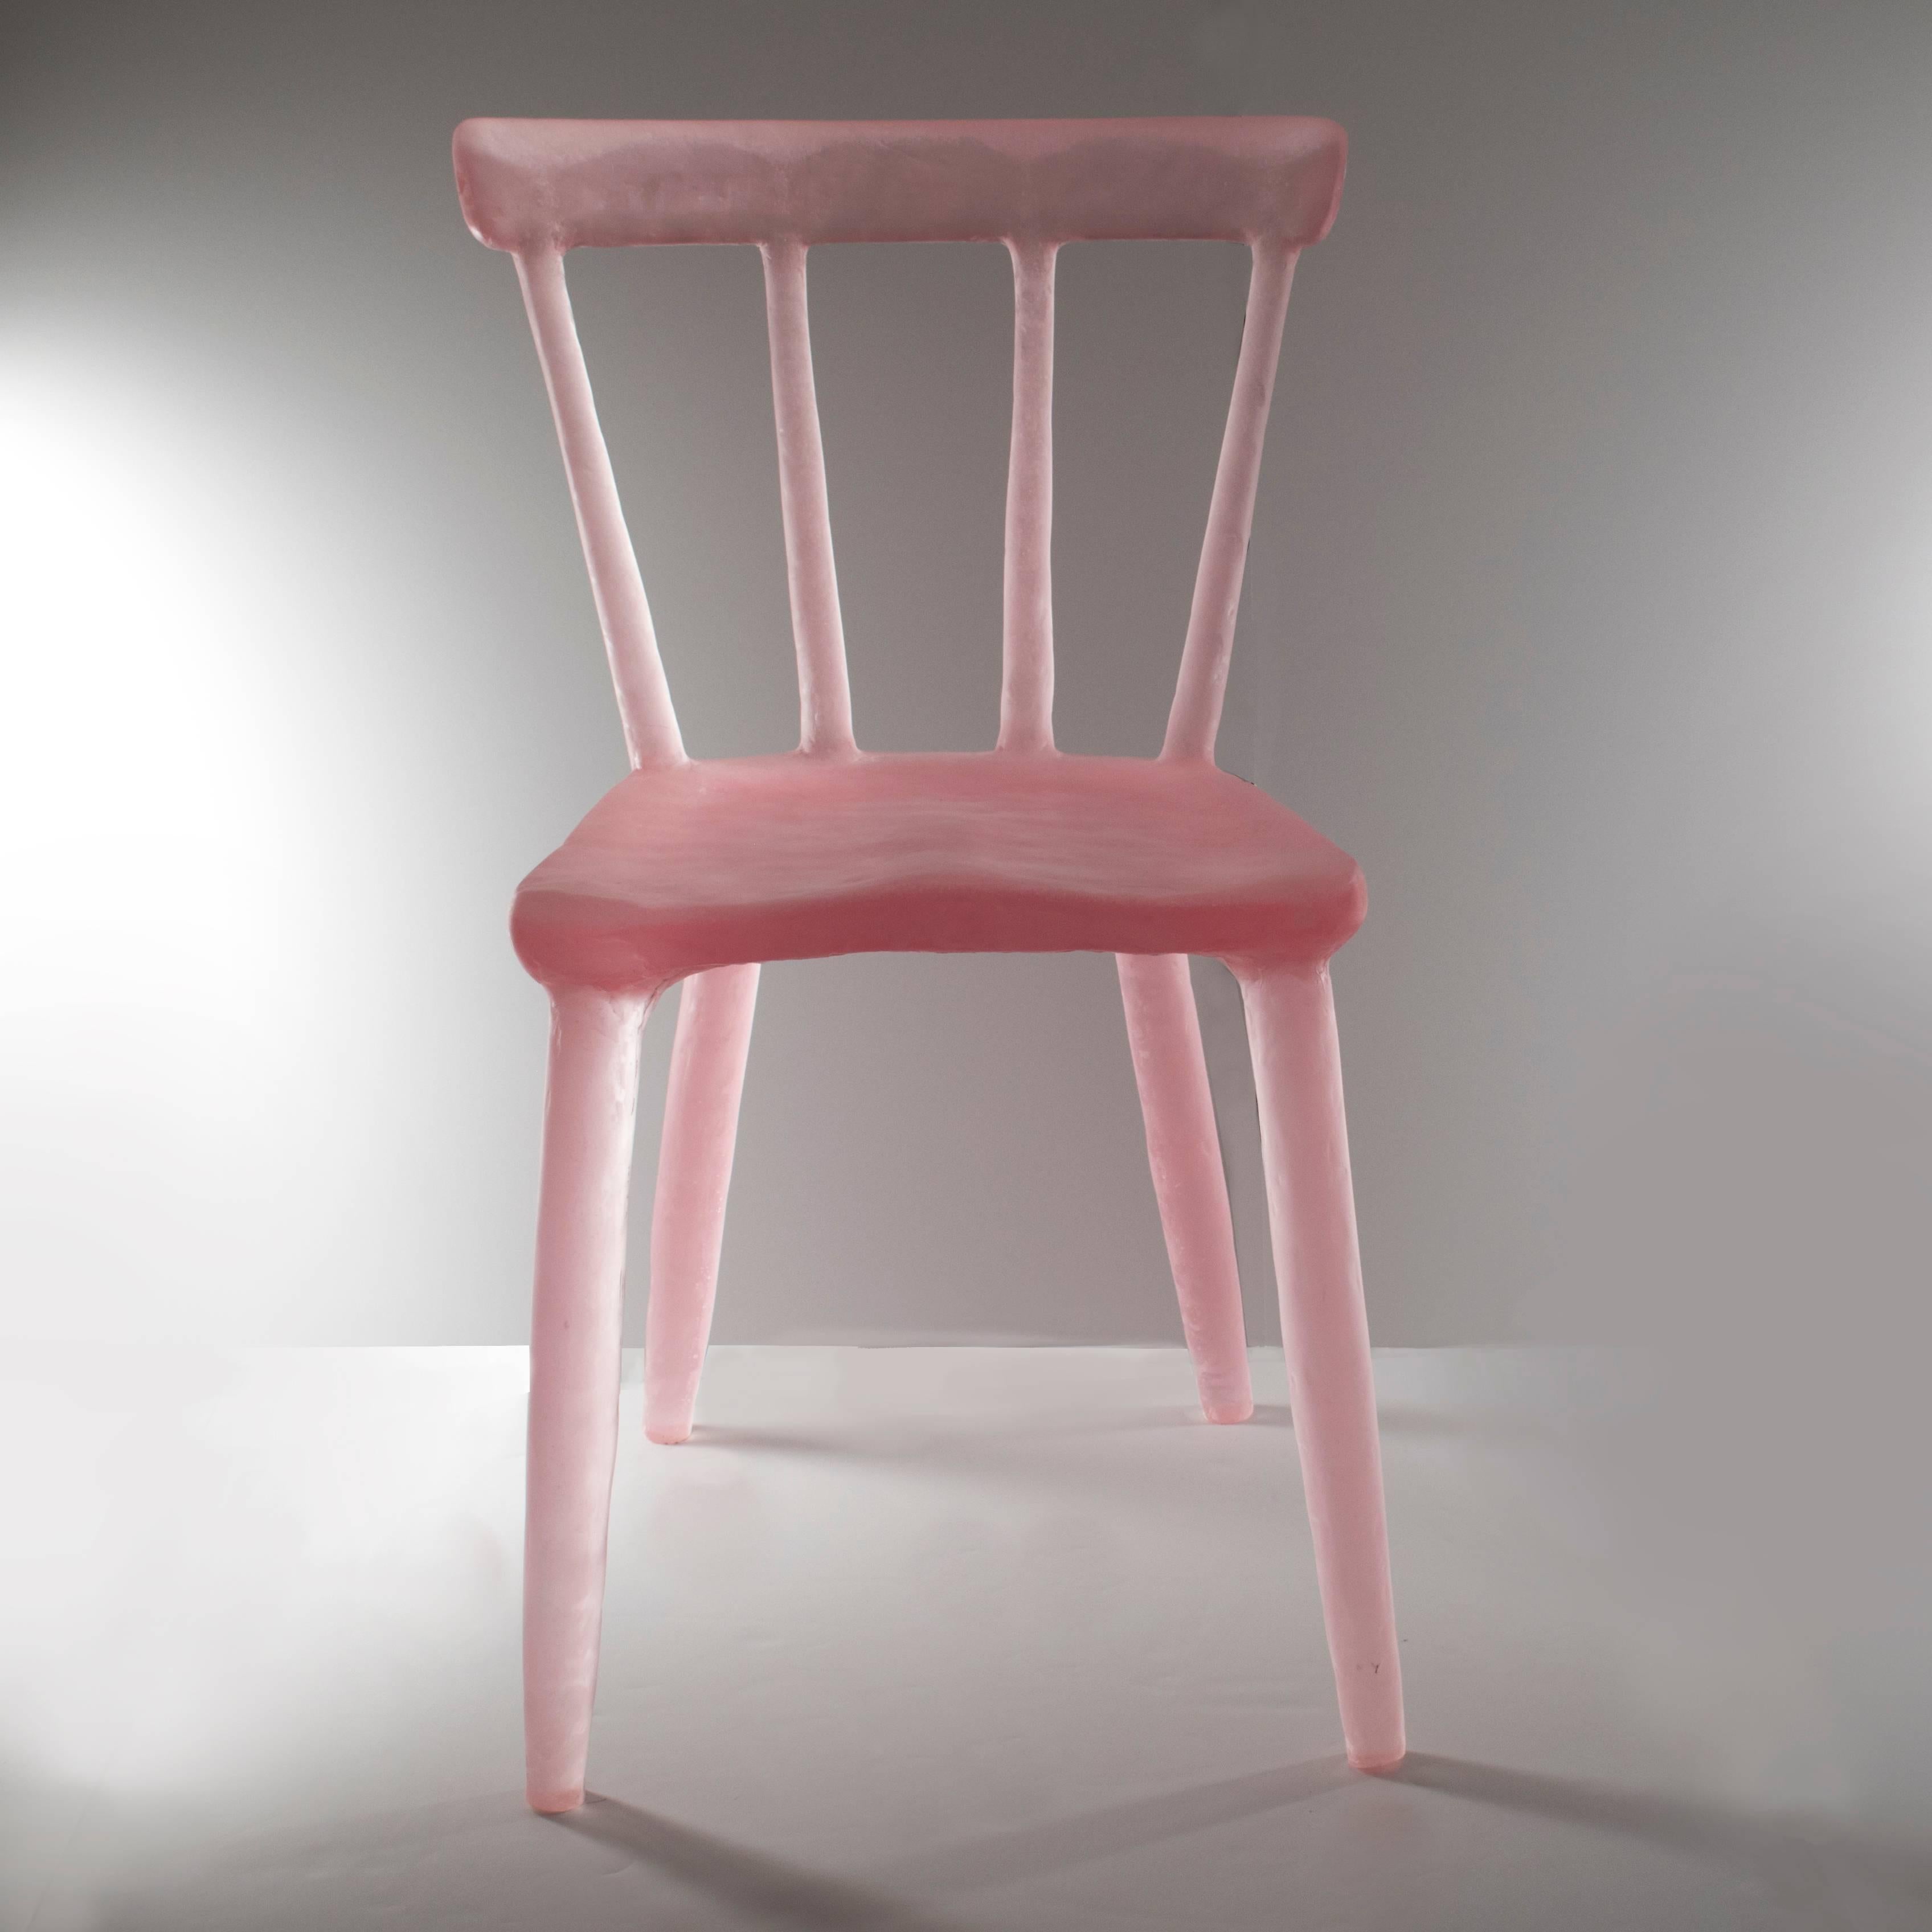 Translucent and whimsical, these chairs are handcrafted from a variety of recycled plastics both thermoset and thermoplastic. A specific blend of the plastics is combined in large molds. Once cured, the objects are removed and polished to reveal